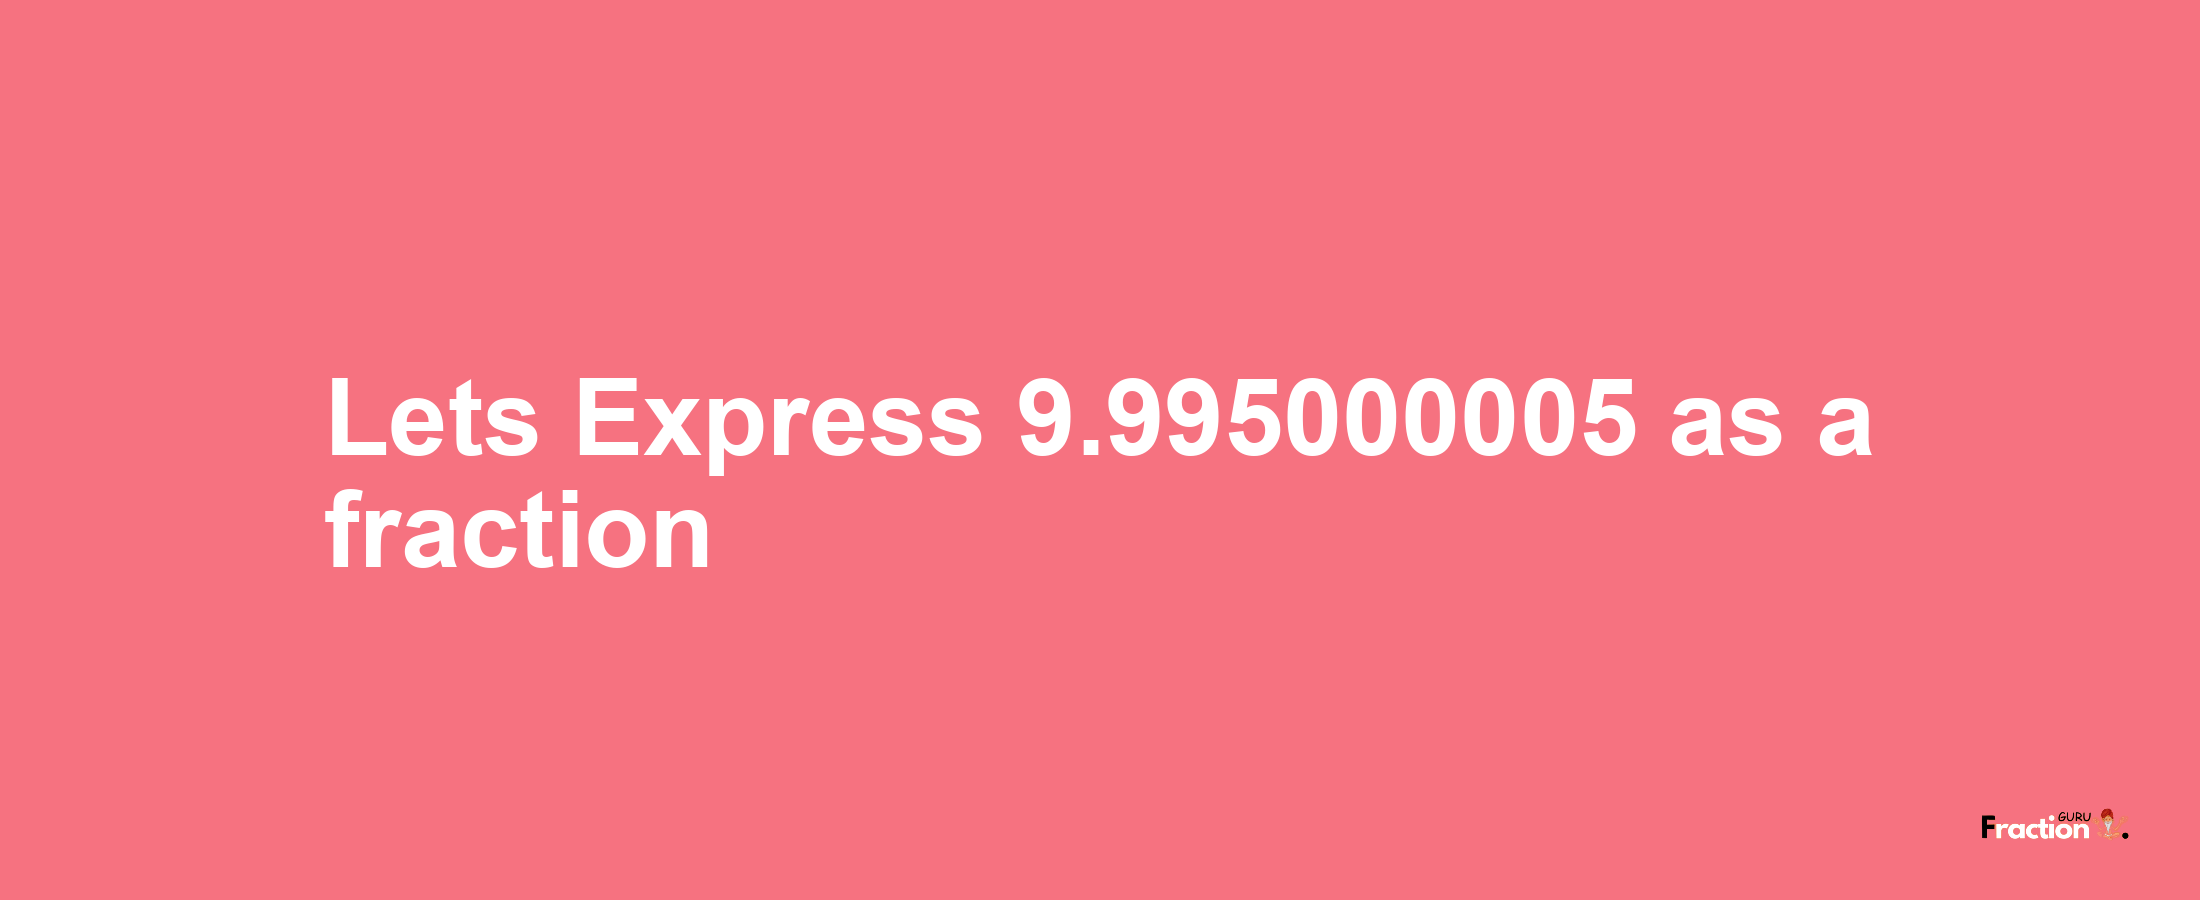 Lets Express 9.995000005 as afraction